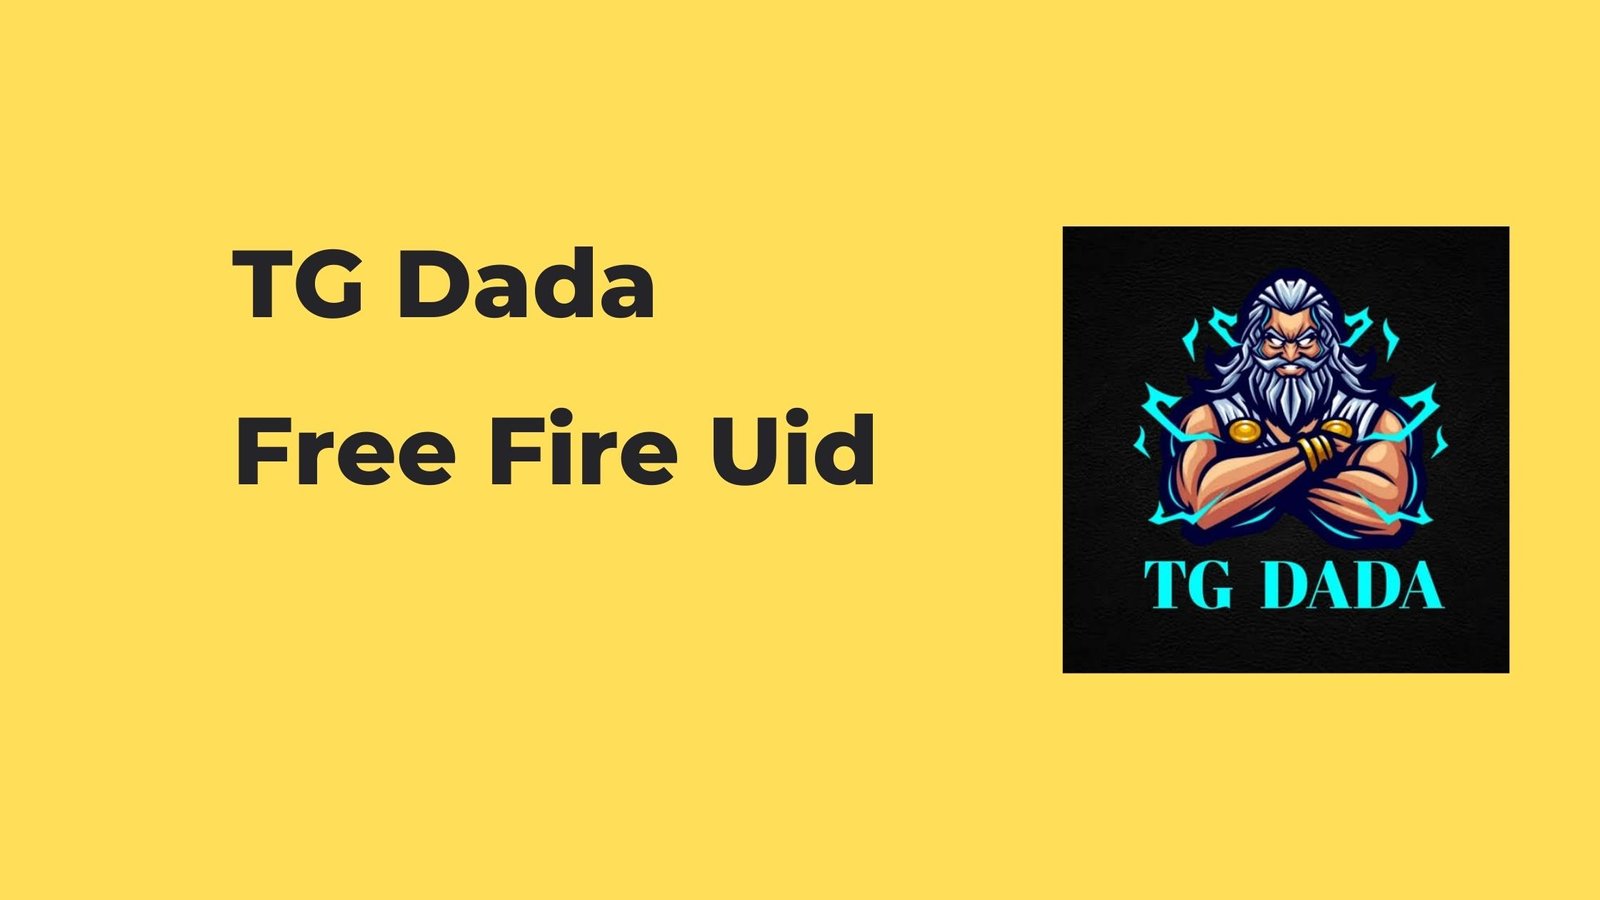 this image has a logo og tg dada and text contains TG dada uid